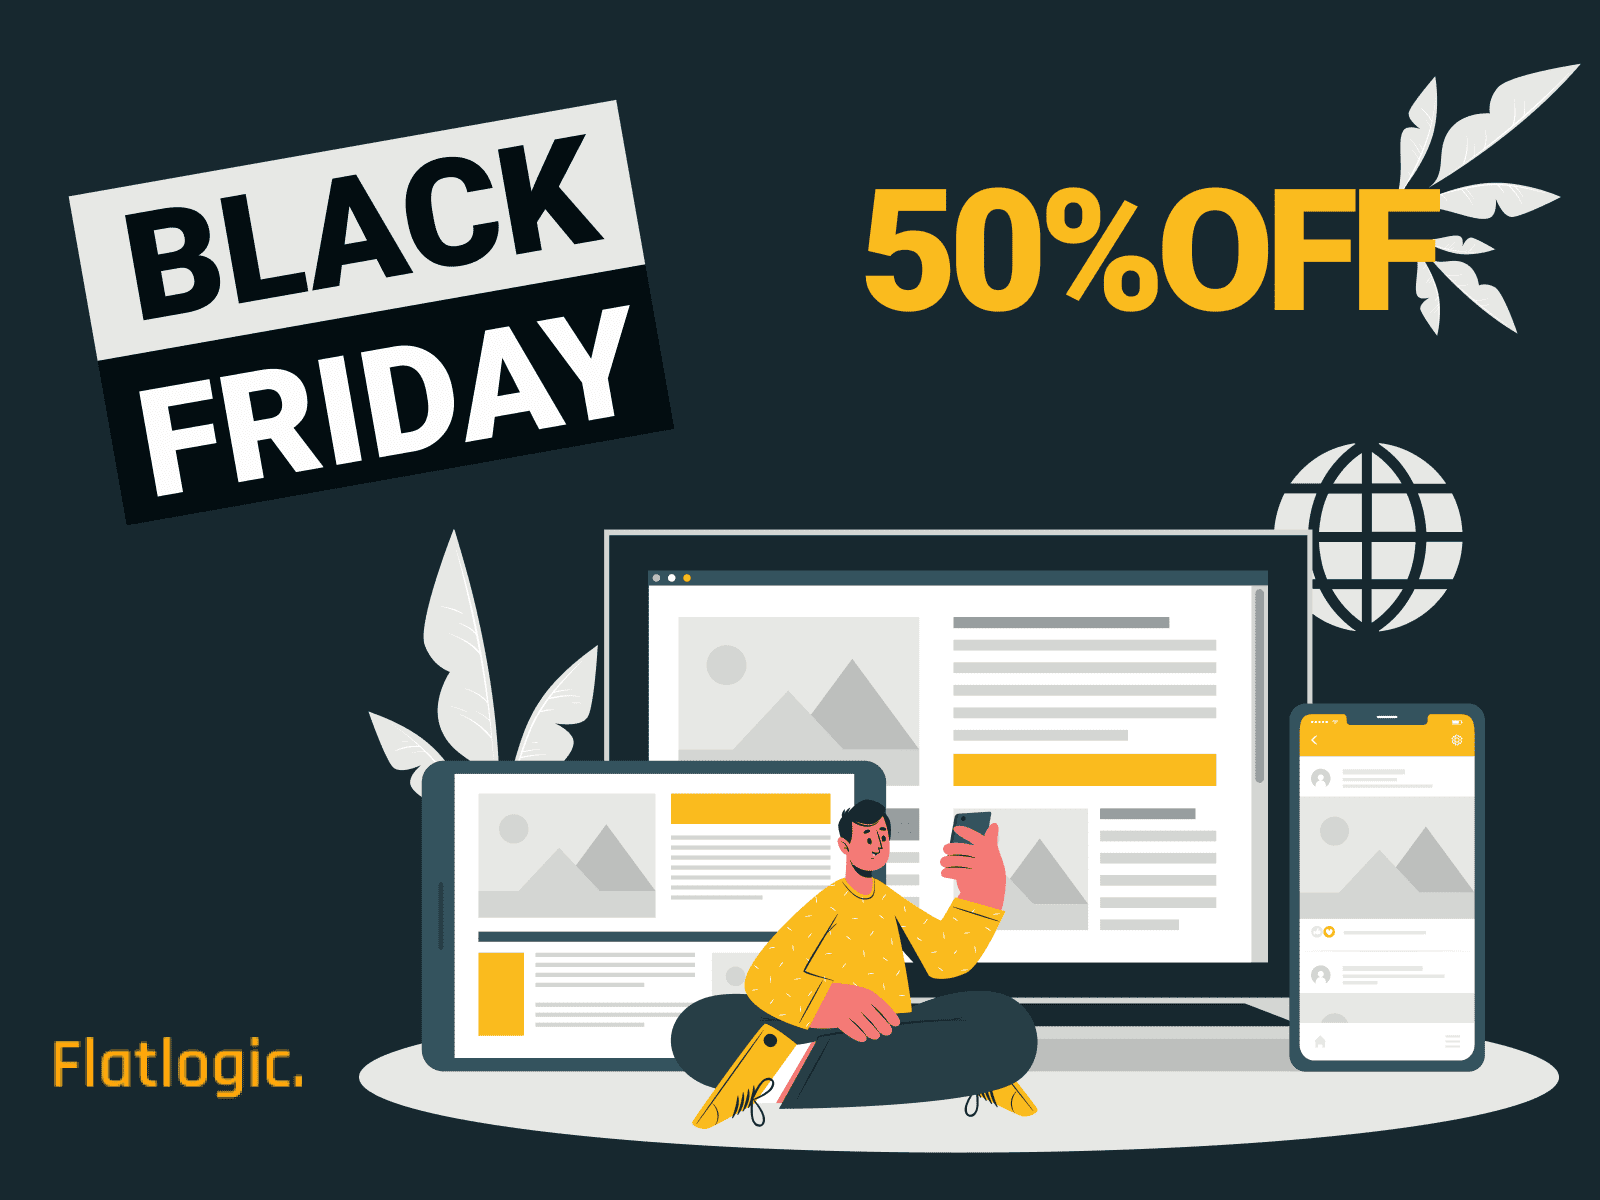 OMG! Black Friday is coming! 50% Off All Templates.